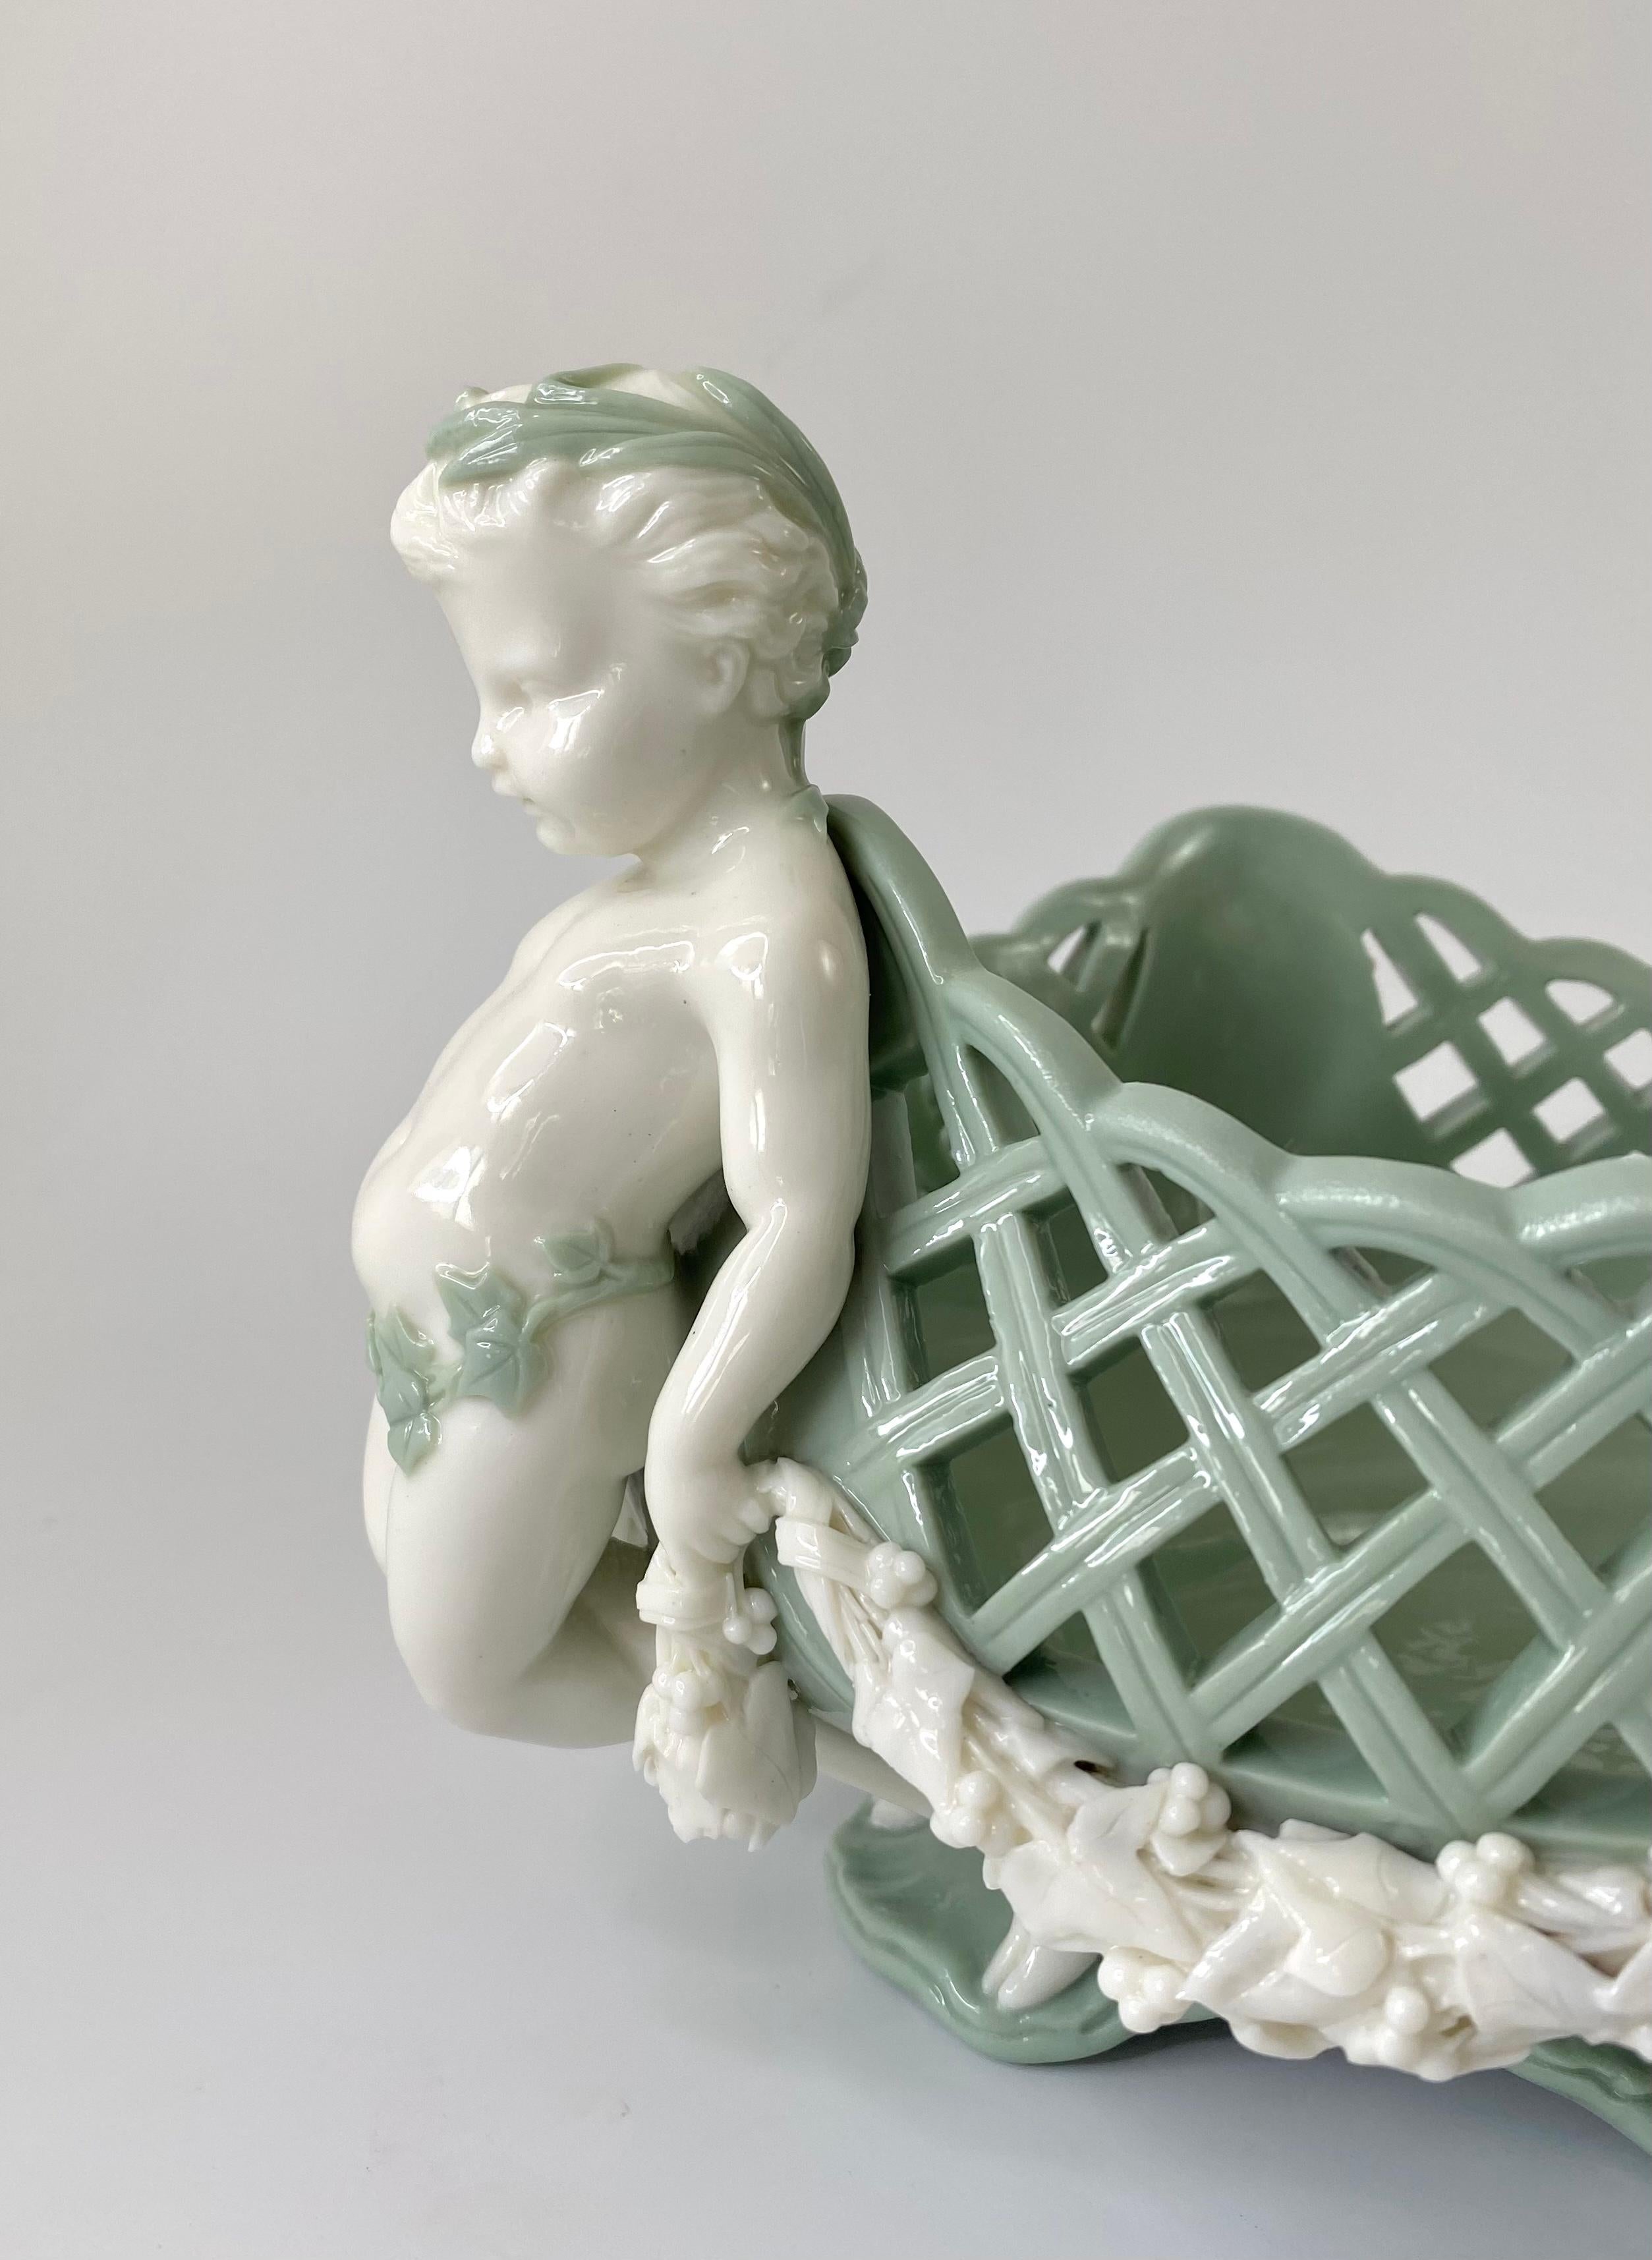 Minton Pate Sur Pate Porcelain Basket, Dated 1867 In Excellent Condition For Sale In Gargrave, North Yorkshire